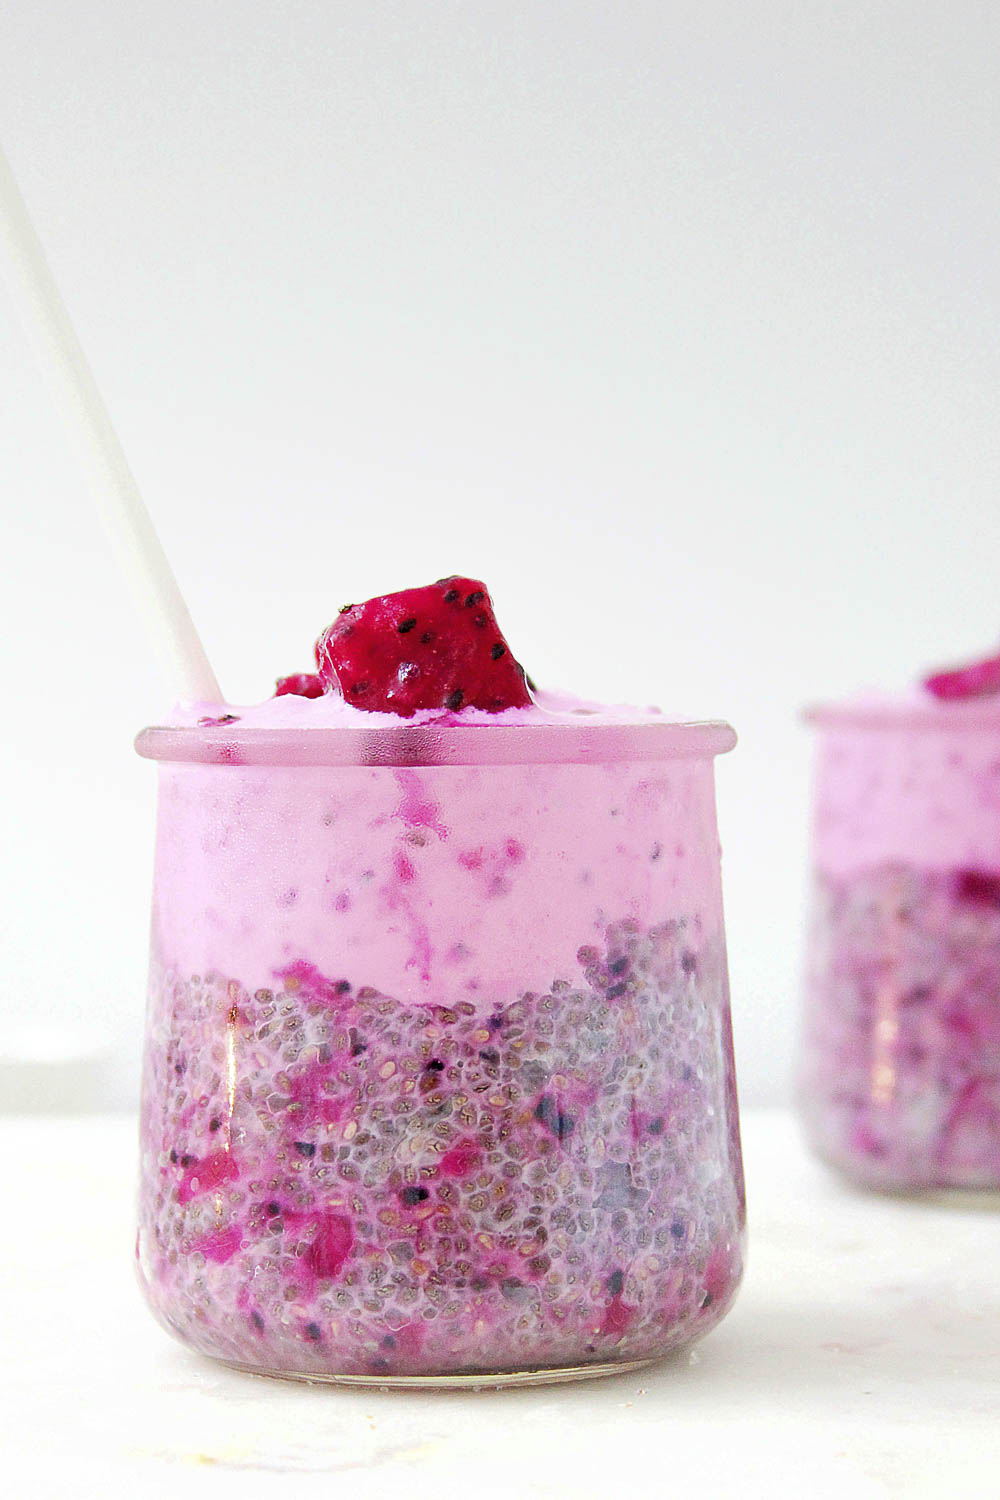 Healthy, wholesome, filling, and nutritious. This dragon fruit chia pudding is the perfect treat you can make ahead and keep on hand when you're in a hurry in the morning, or when you need a great healthy snack. It's a high fiber energizing superfood & the perfect start of the day!